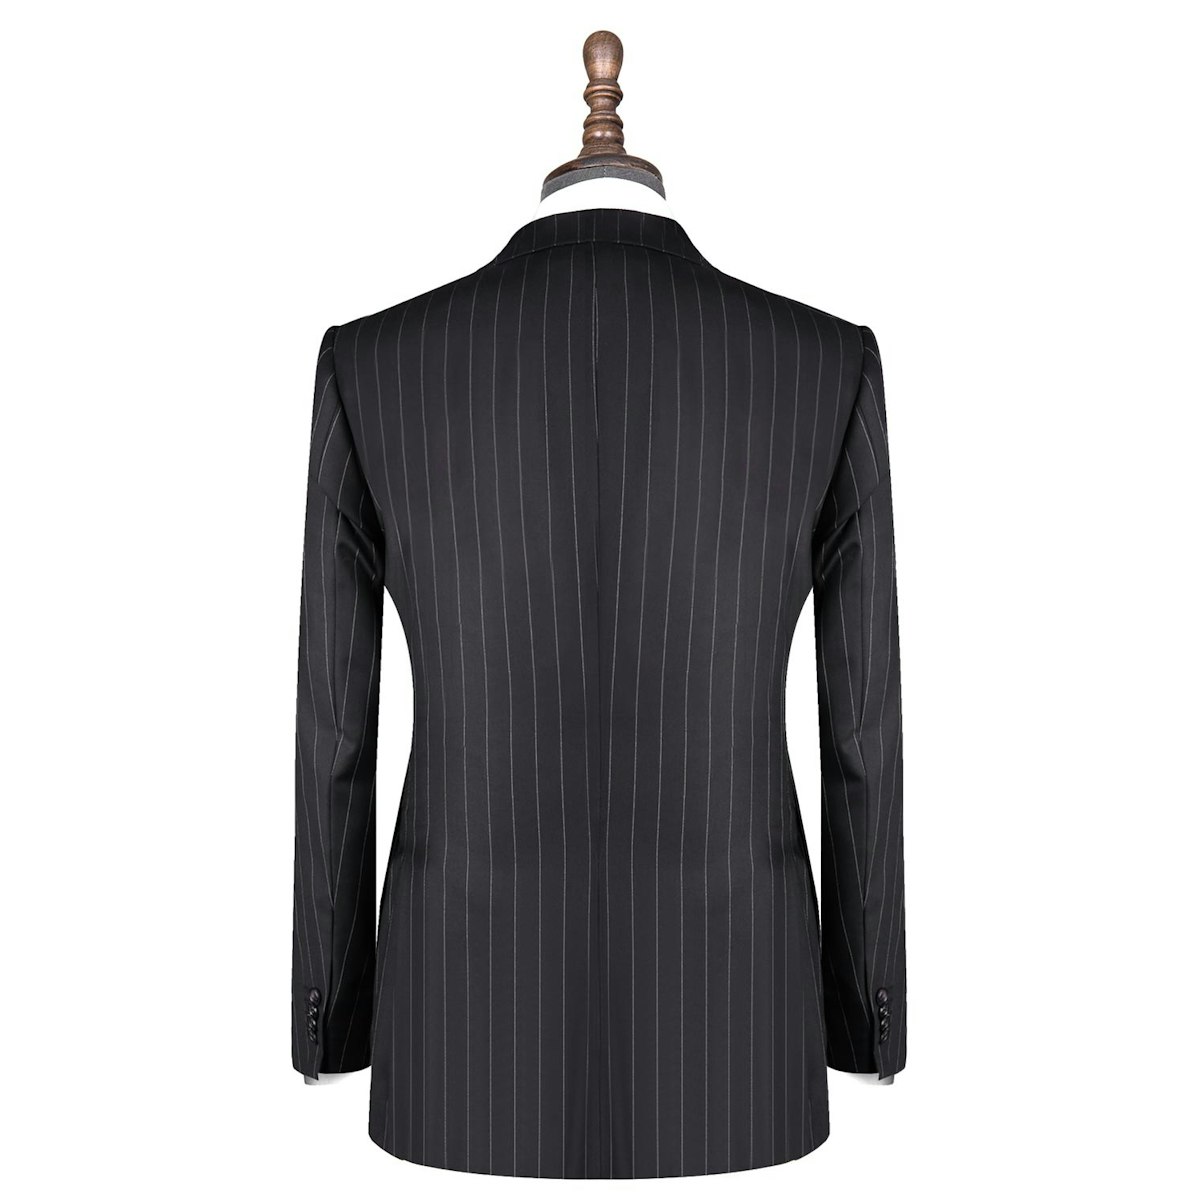 InStitchu Collection The Haverhill mens suit